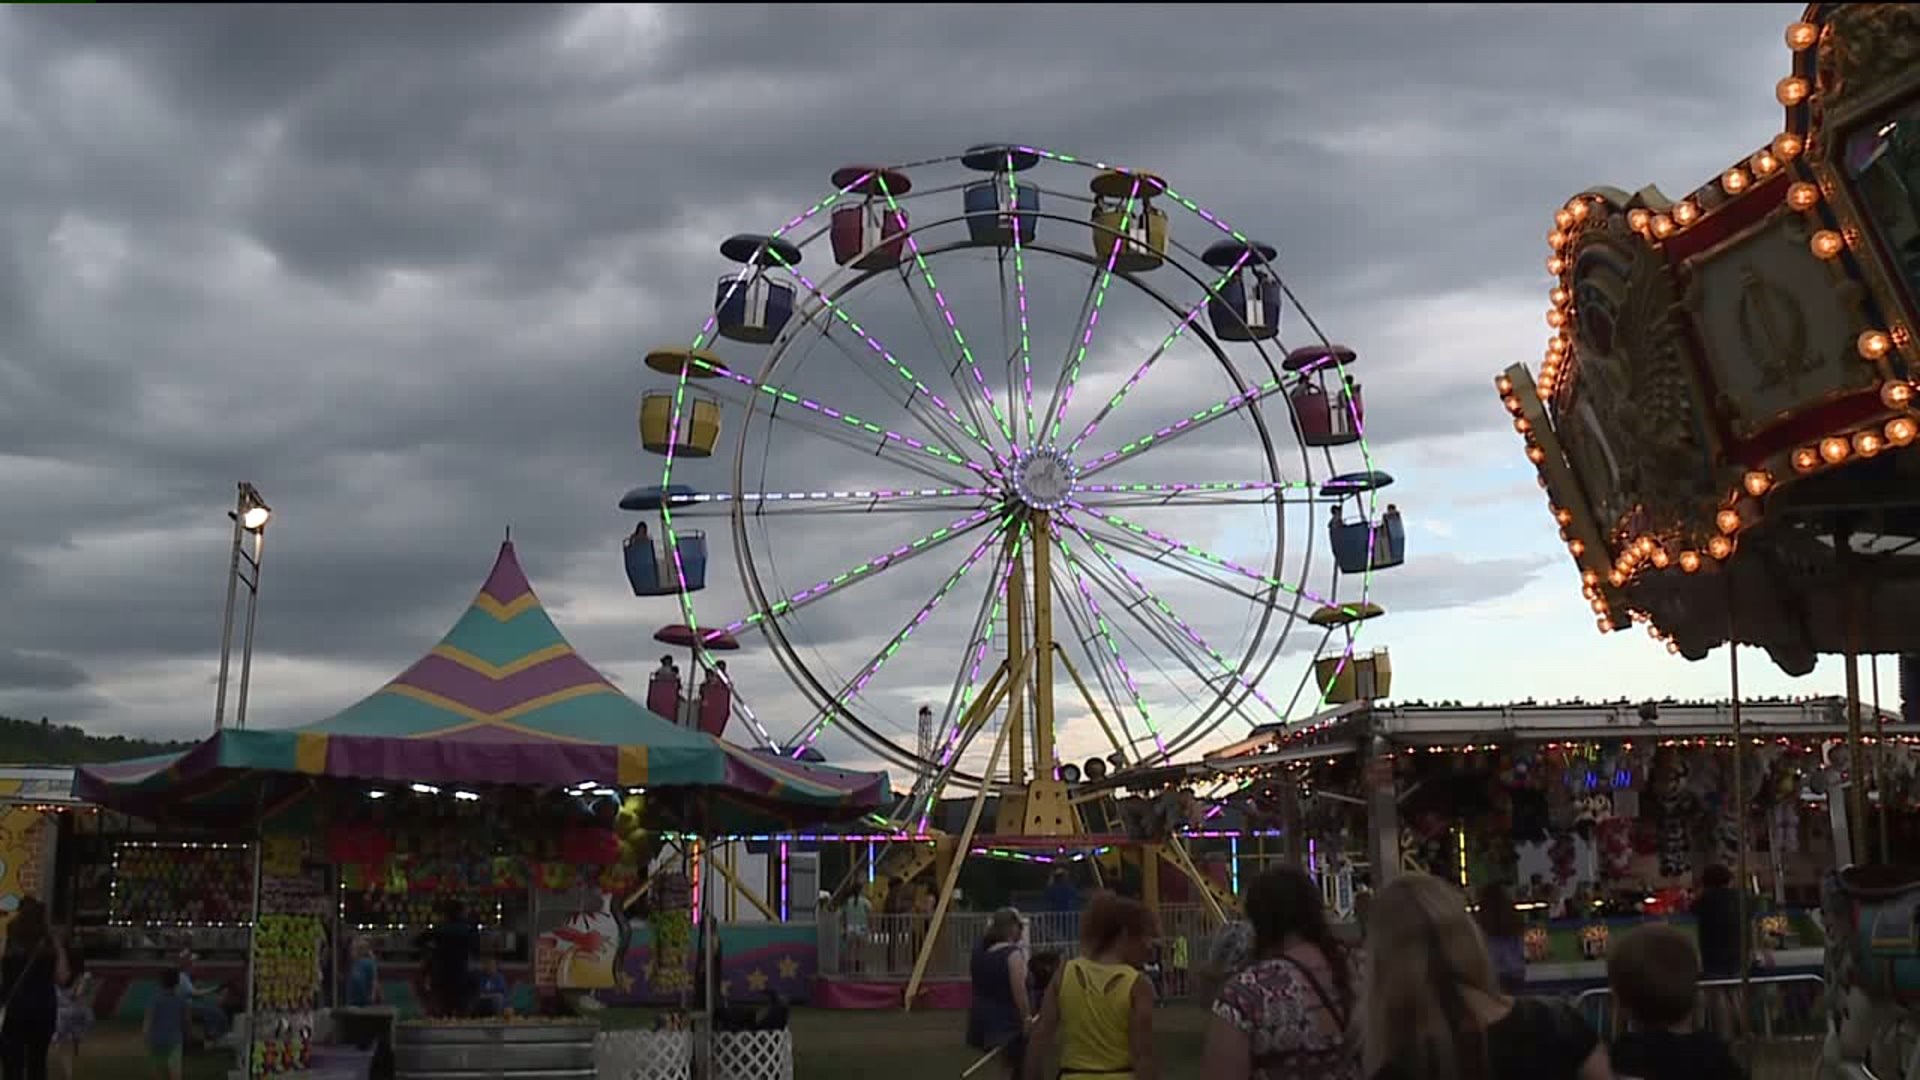 Folks Spend Labor Day at Wyoming County Fair to Mark End of Summer